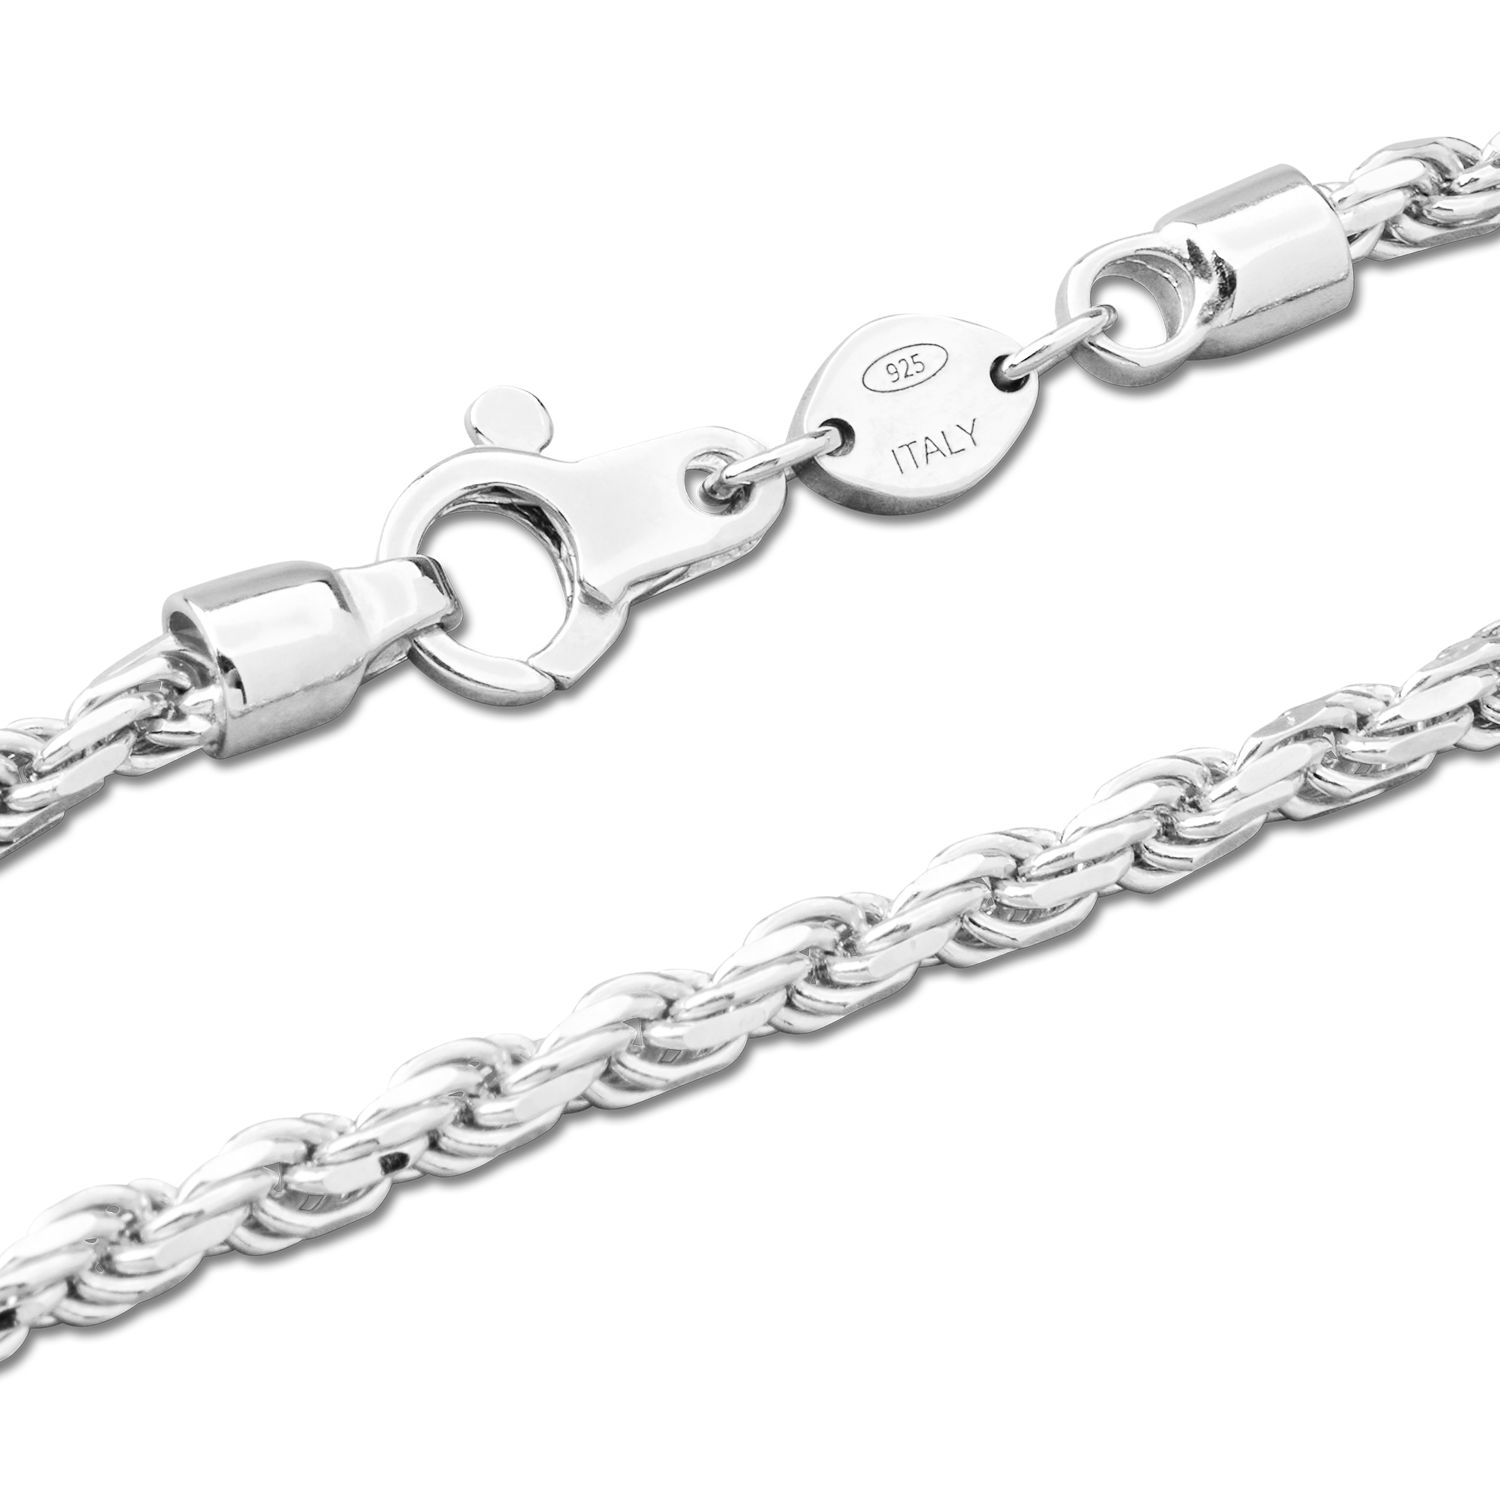 Top Quality Silver 925 Chain Necklace For Women Jewelry Trendy